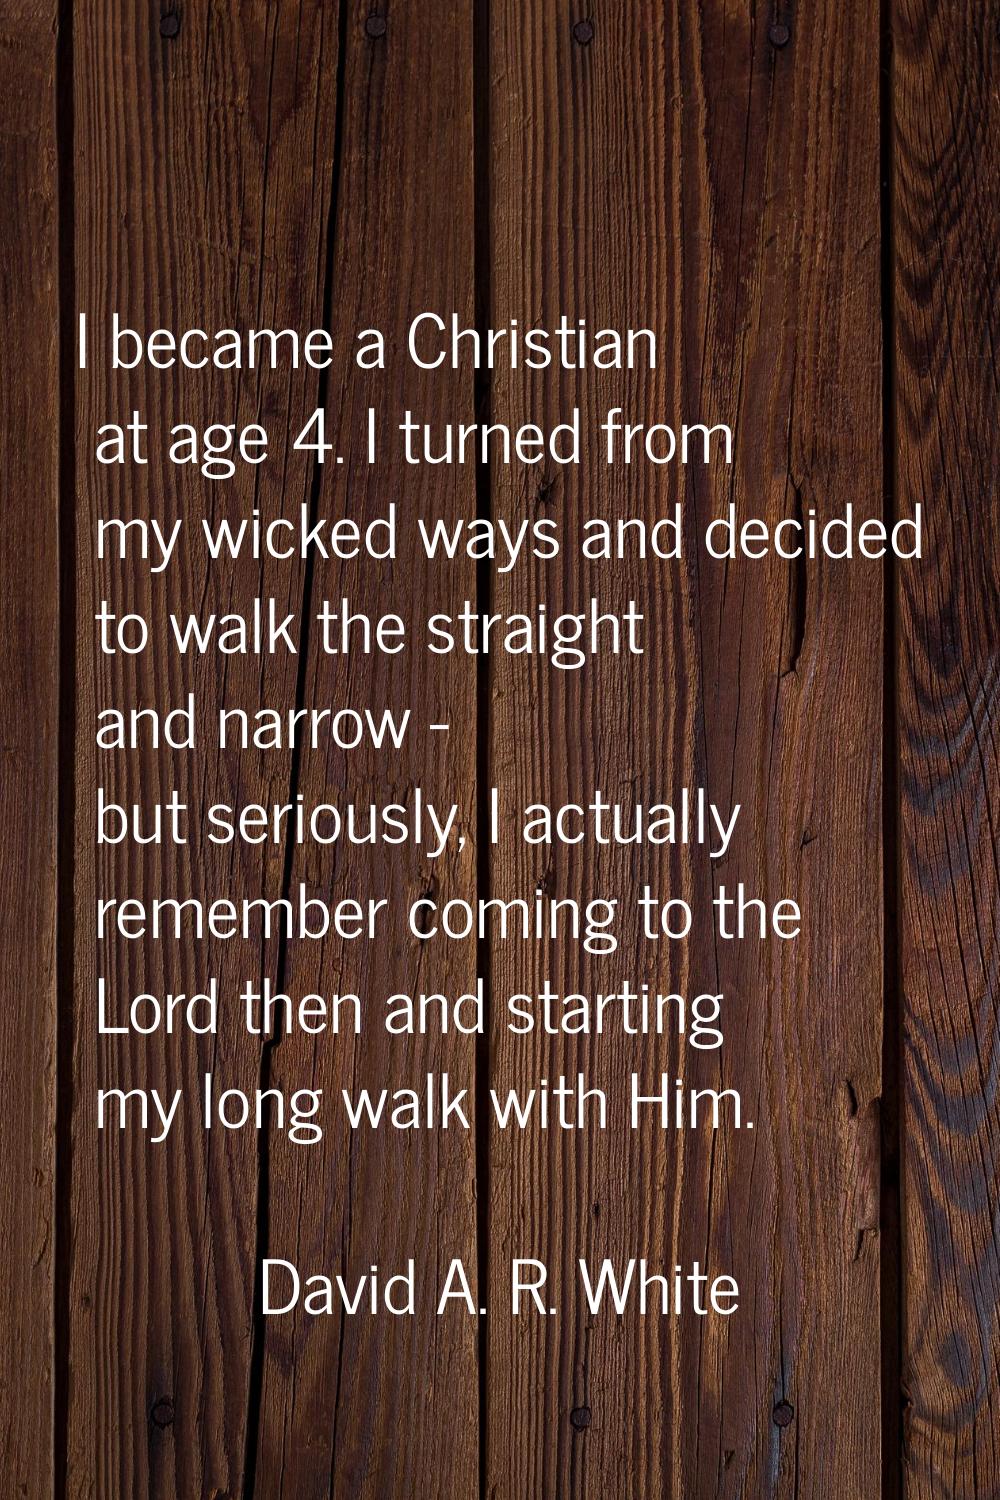 I became a Christian at age 4. I turned from my wicked ways and decided to walk the straight and na